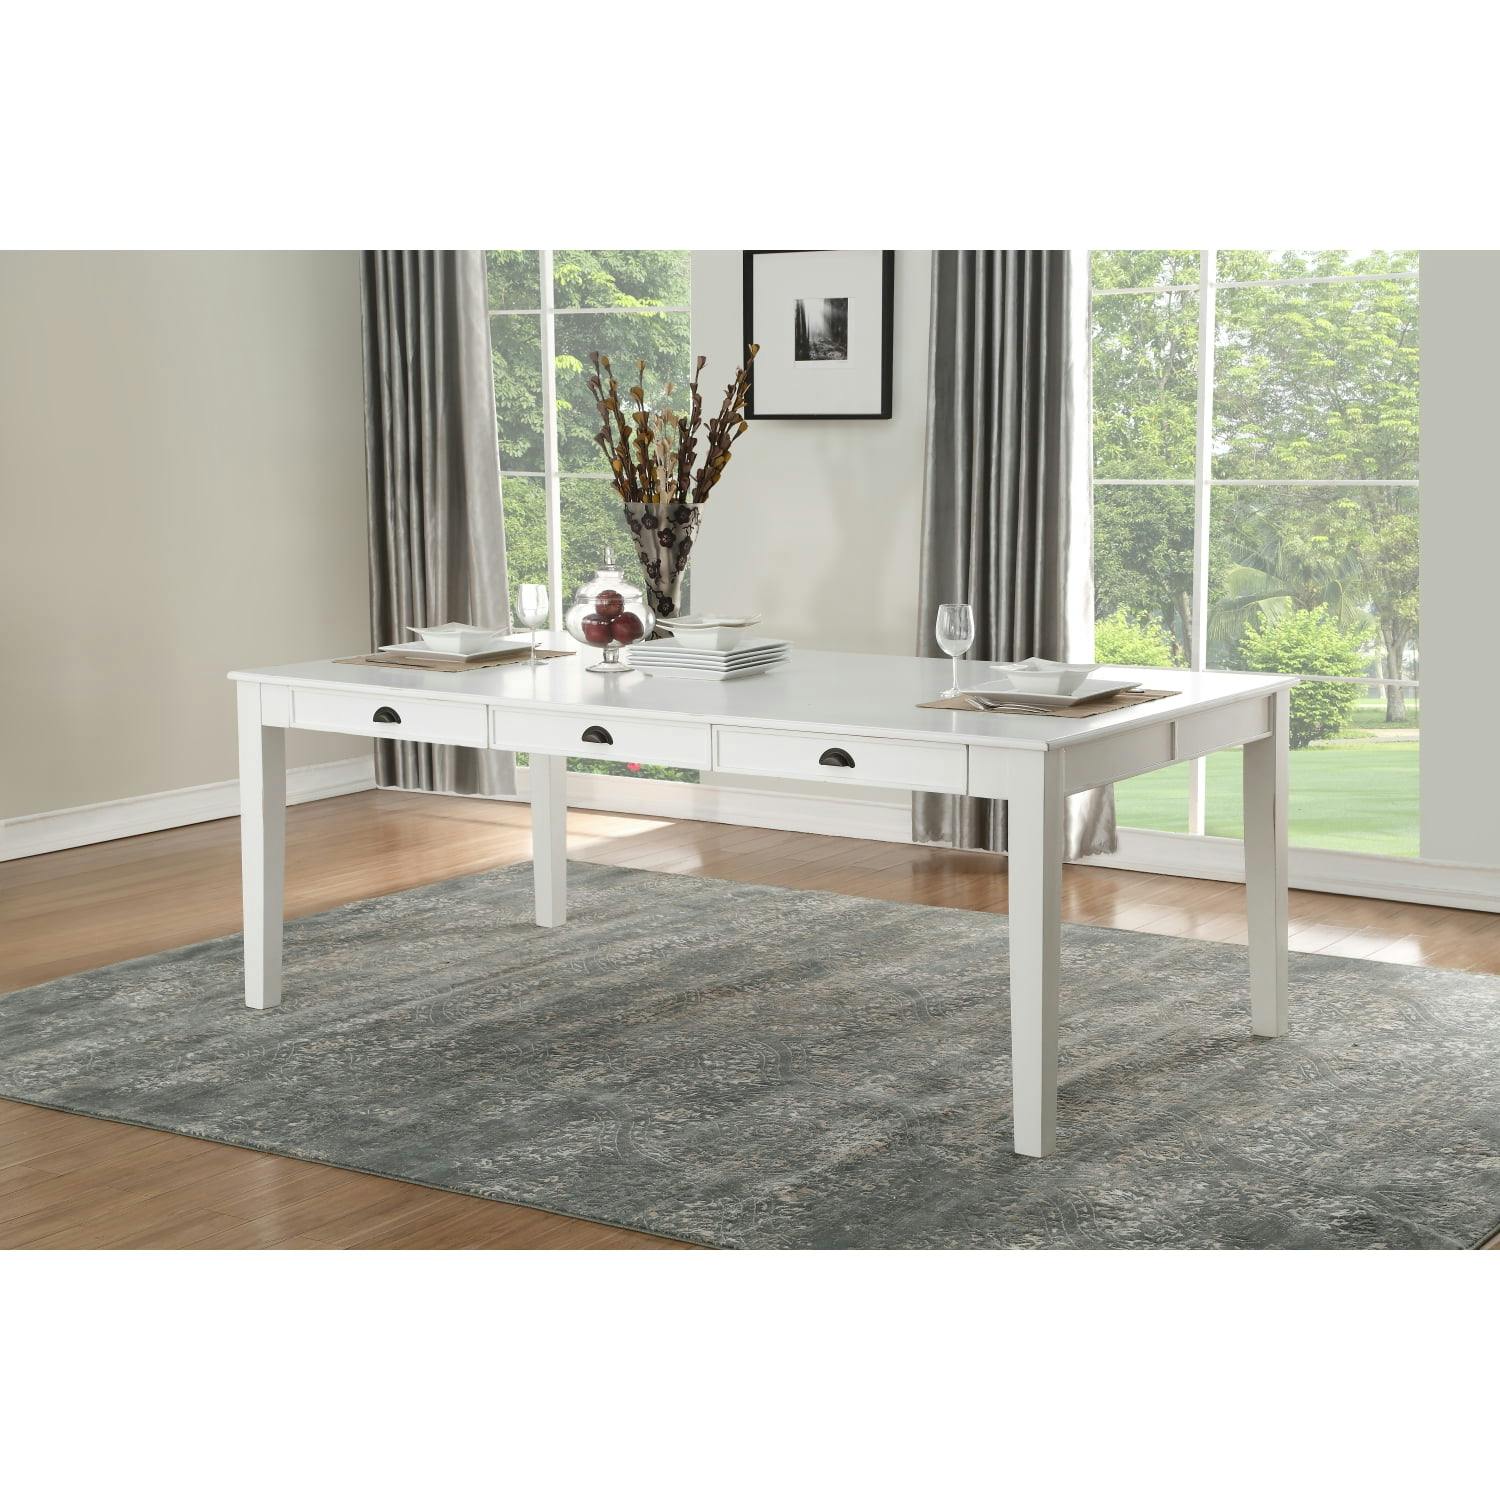 Antique White Transitional Rectangular Dining Table with Storage